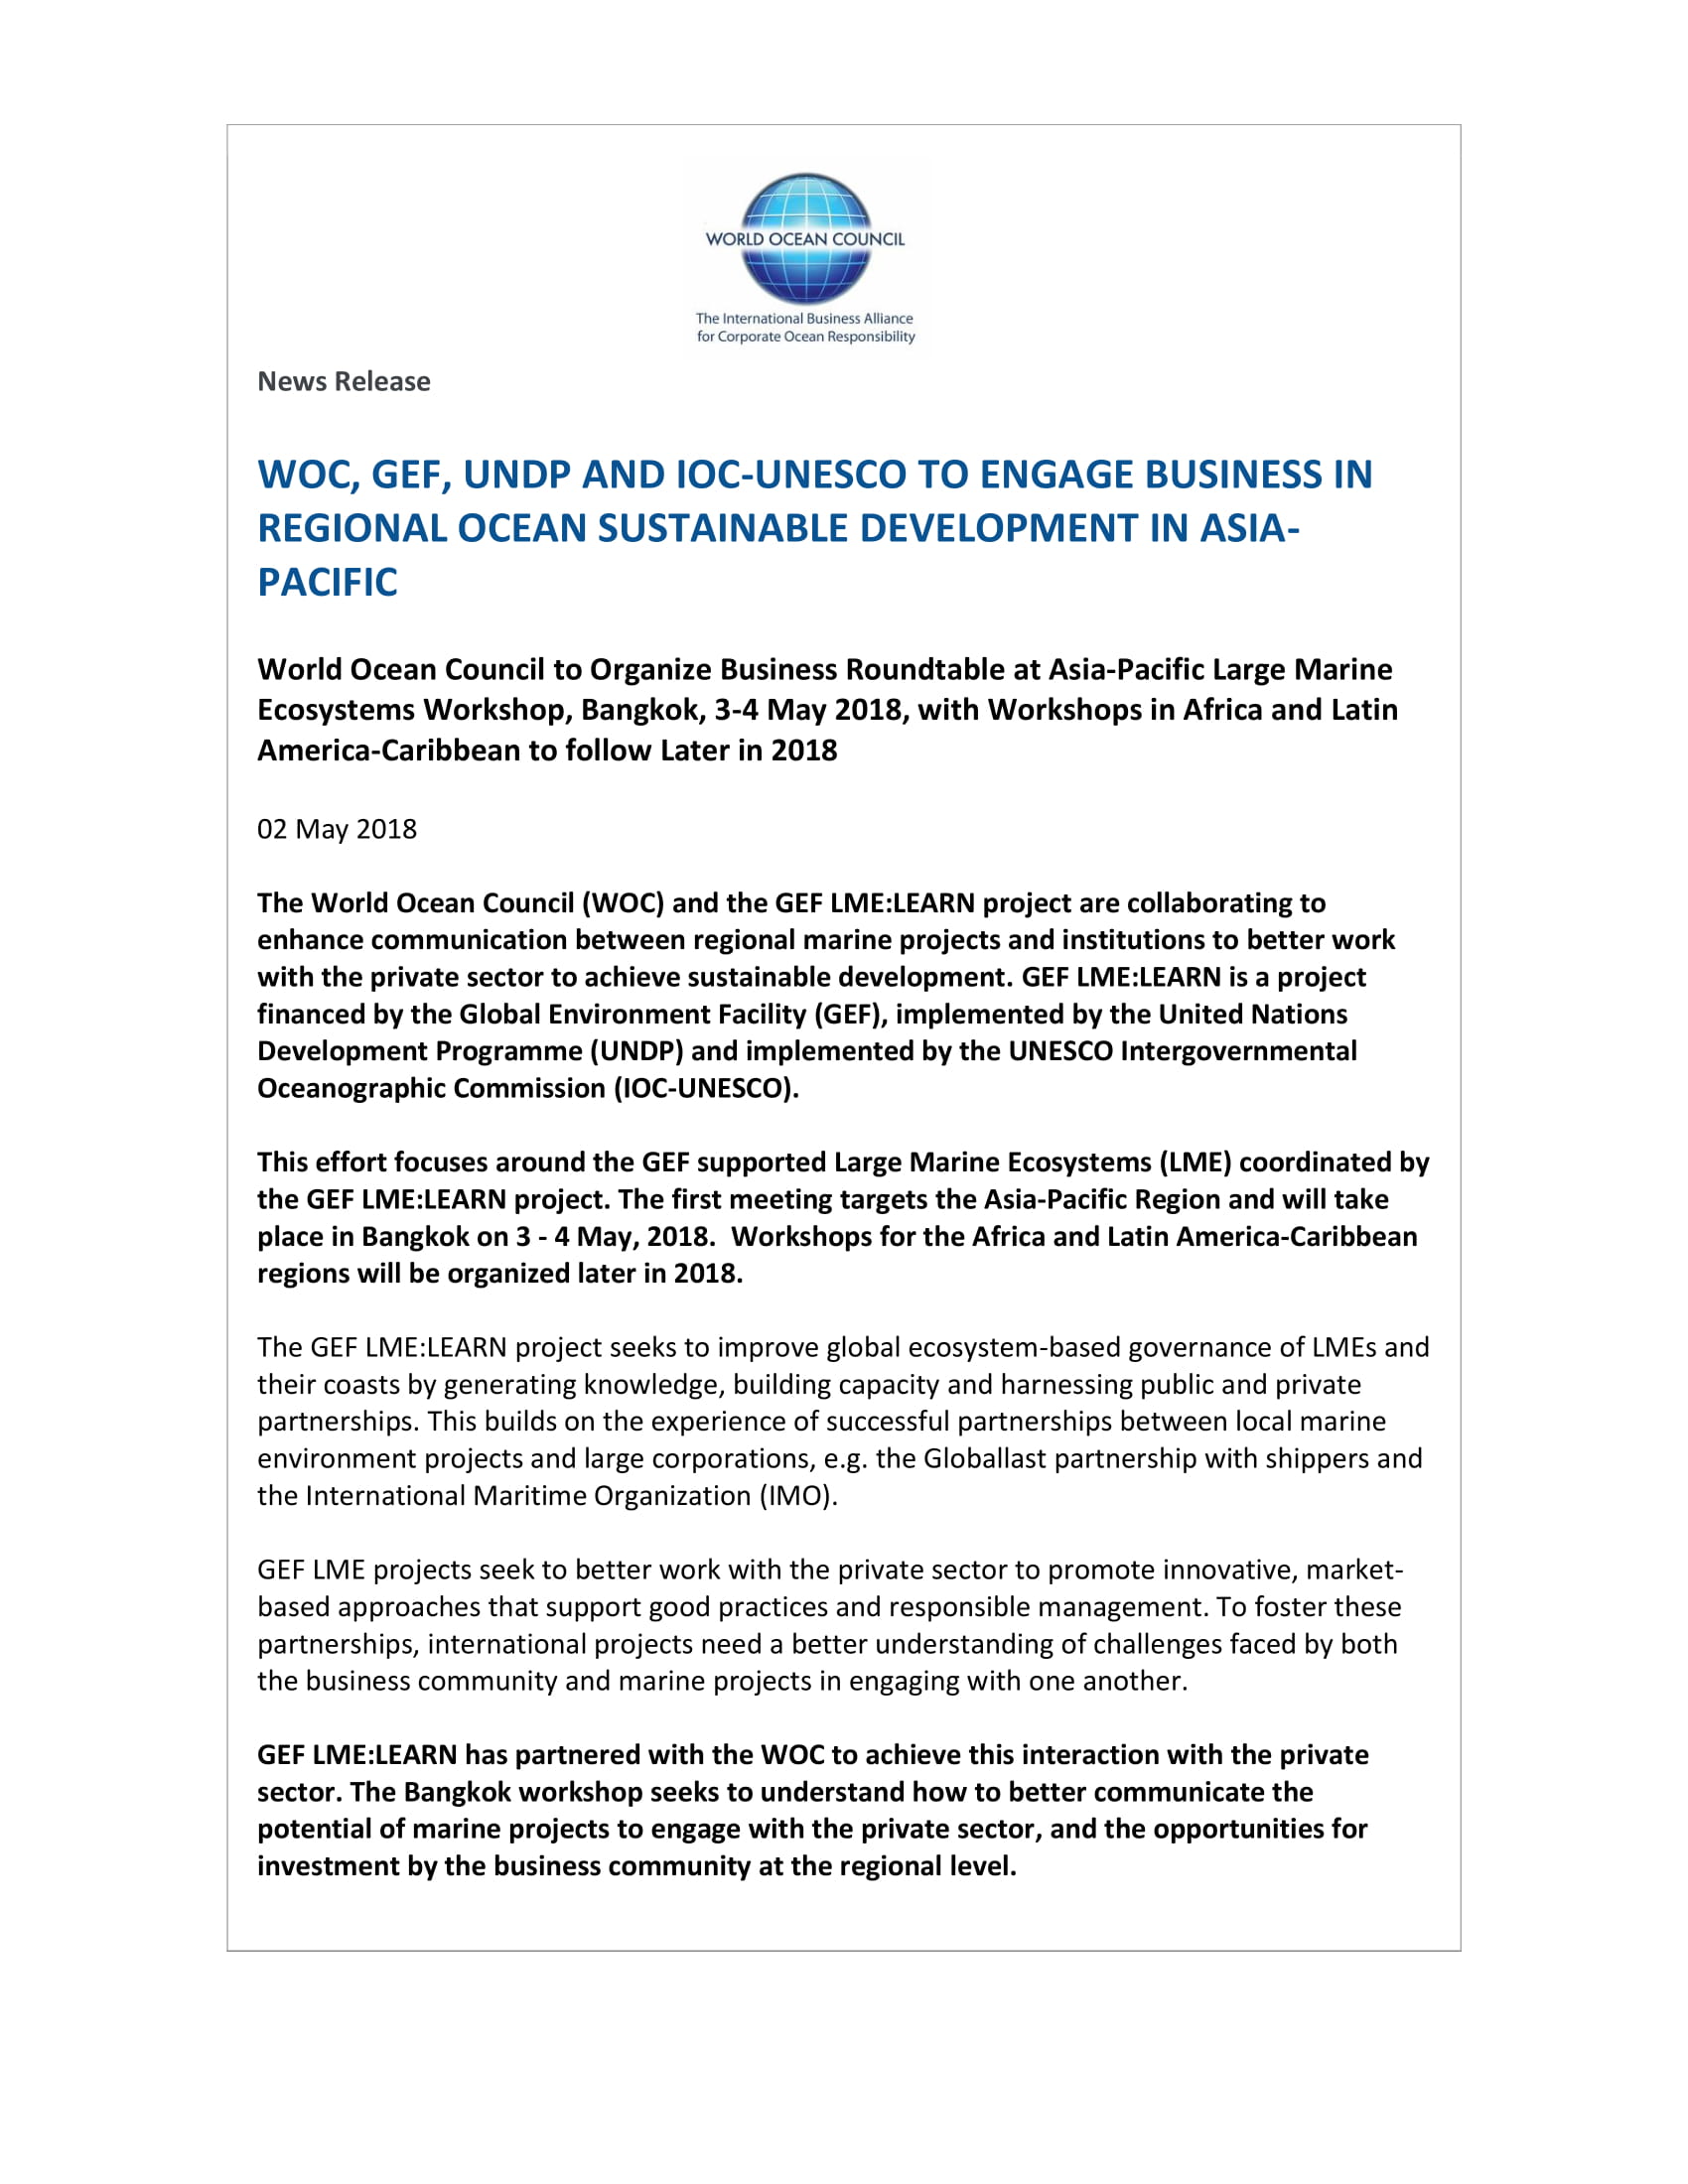 WOC Engages Business in Regional Ocean Sustainable Development in Asia-Pacific